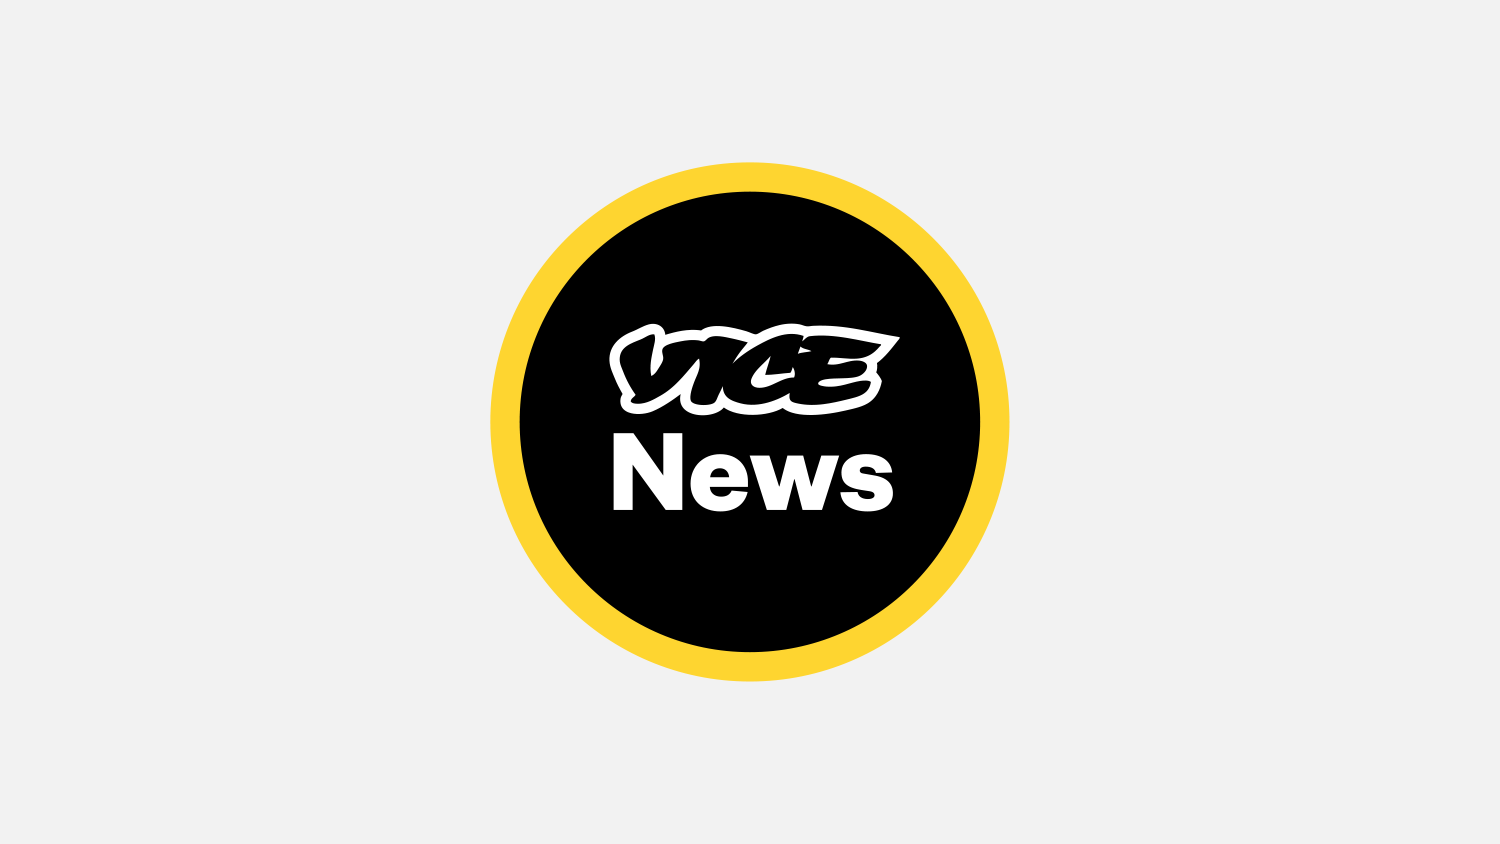 https://company.vice.com/wp-content/uploads/2019/09/Preview-VICE-News-Circle.png